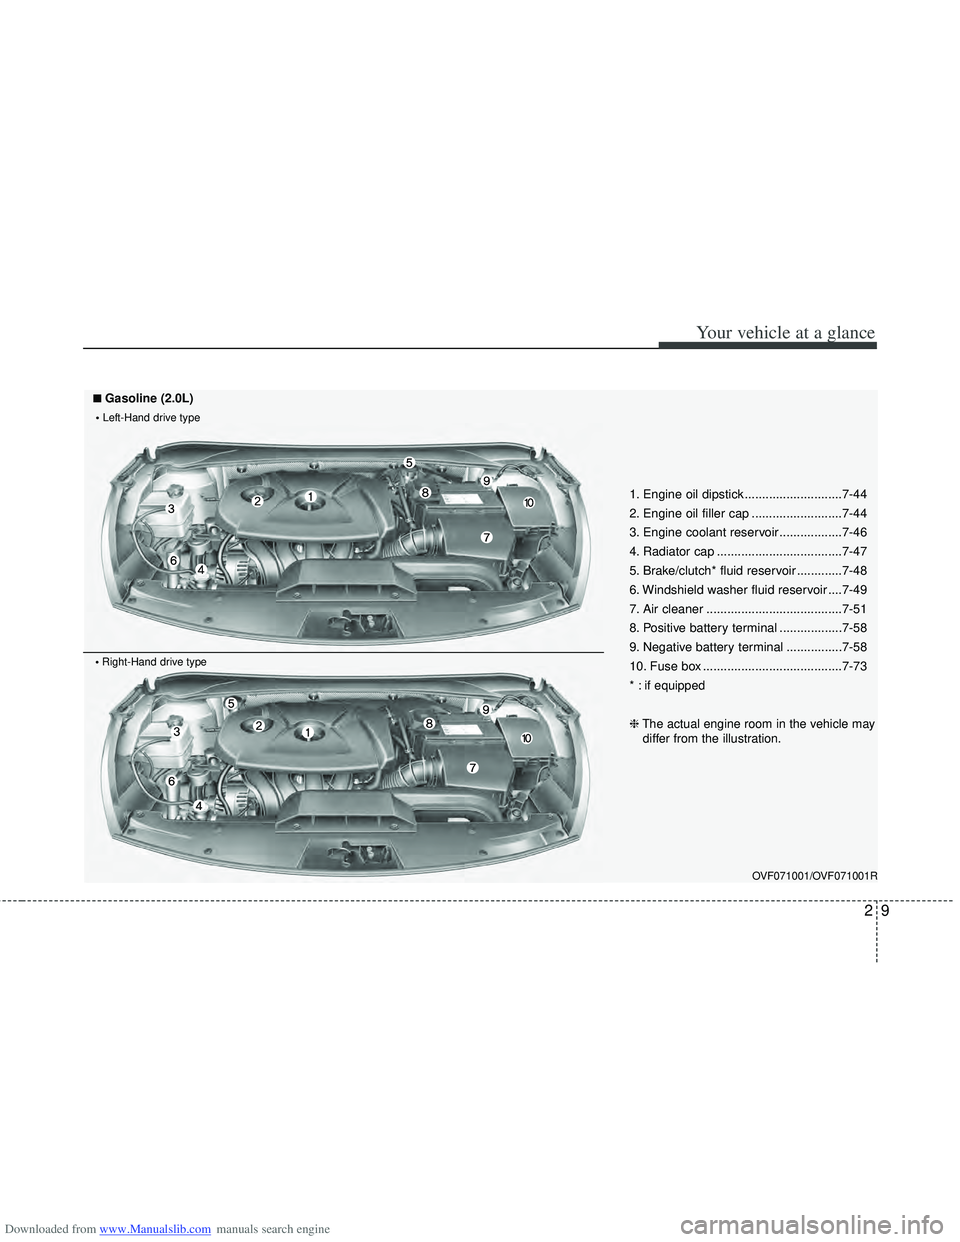 HYUNDAI I40 2016  Owners Manual Downloaded from www.Manualslib.com manuals search engine 29
Your vehicle at a glance
OVF071001/OVF071001R
1. Engine oil dipstick ............................7-44
2. Engine oil filler cap .............